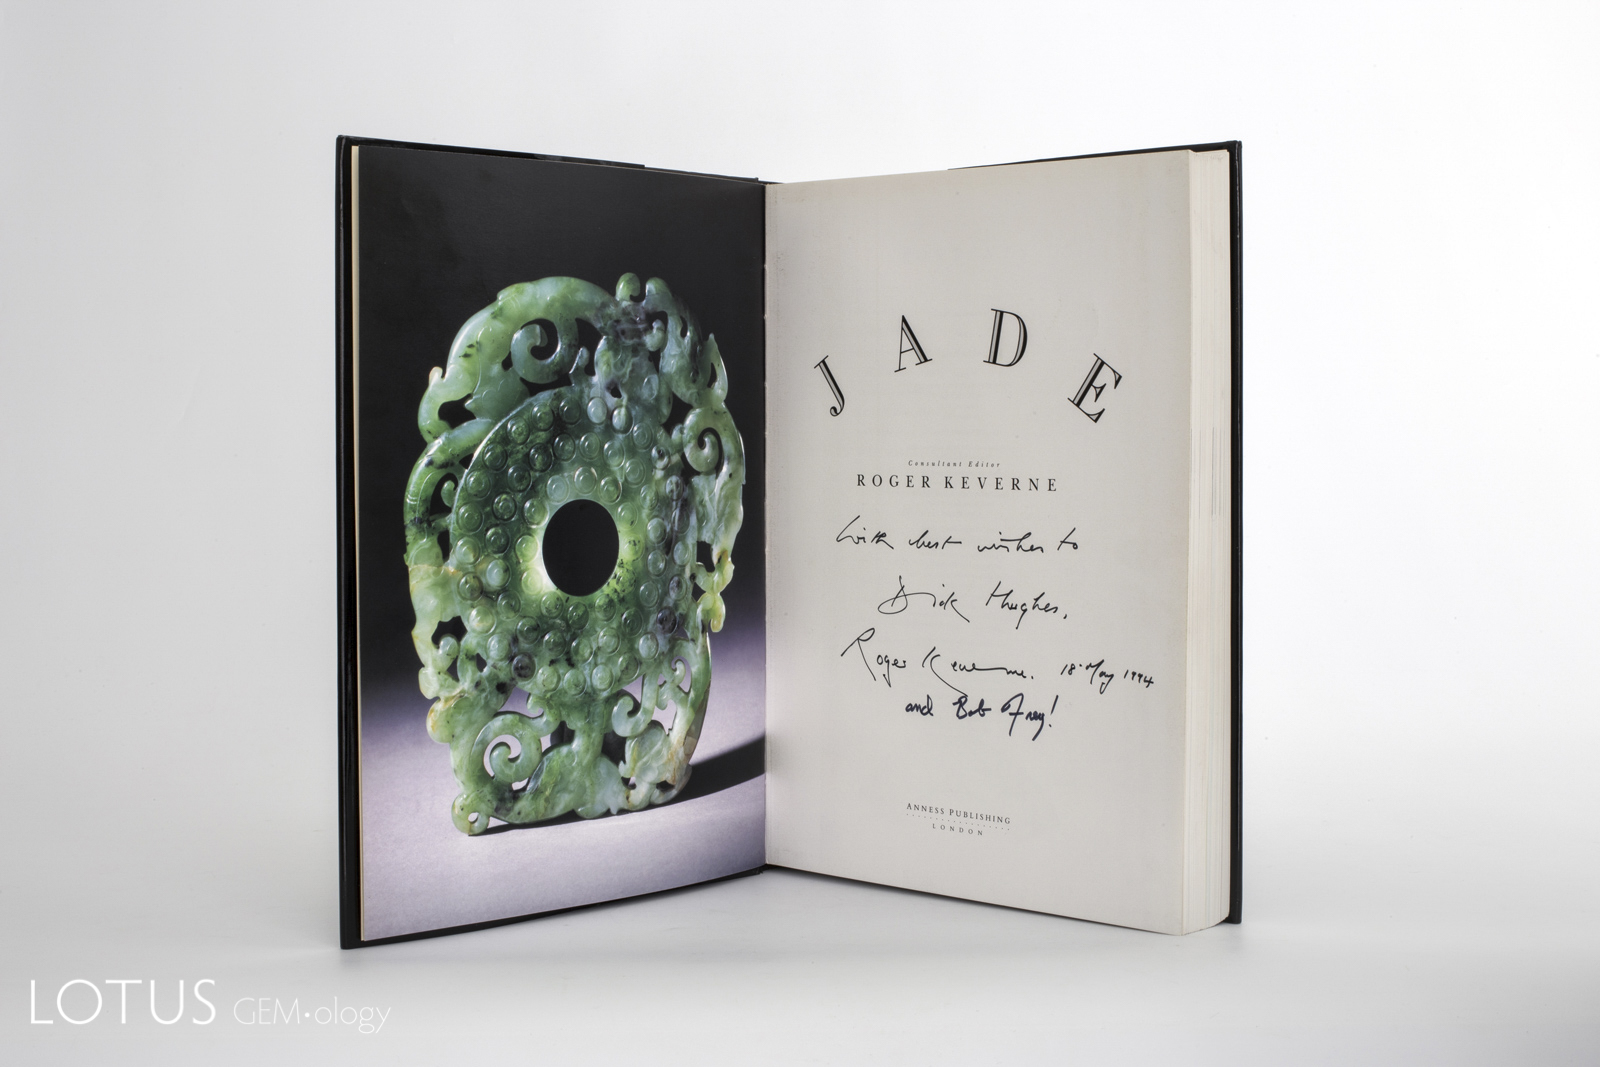 Roger Keverne's 1991 Jade brought together experts from around the world. It is arguably the finest modern work on jade. This copy is signed by two of the authors to Richard Hughes. Such "dedication" copies are generally more valuable, particularly if the person they are dedicated to is famous.